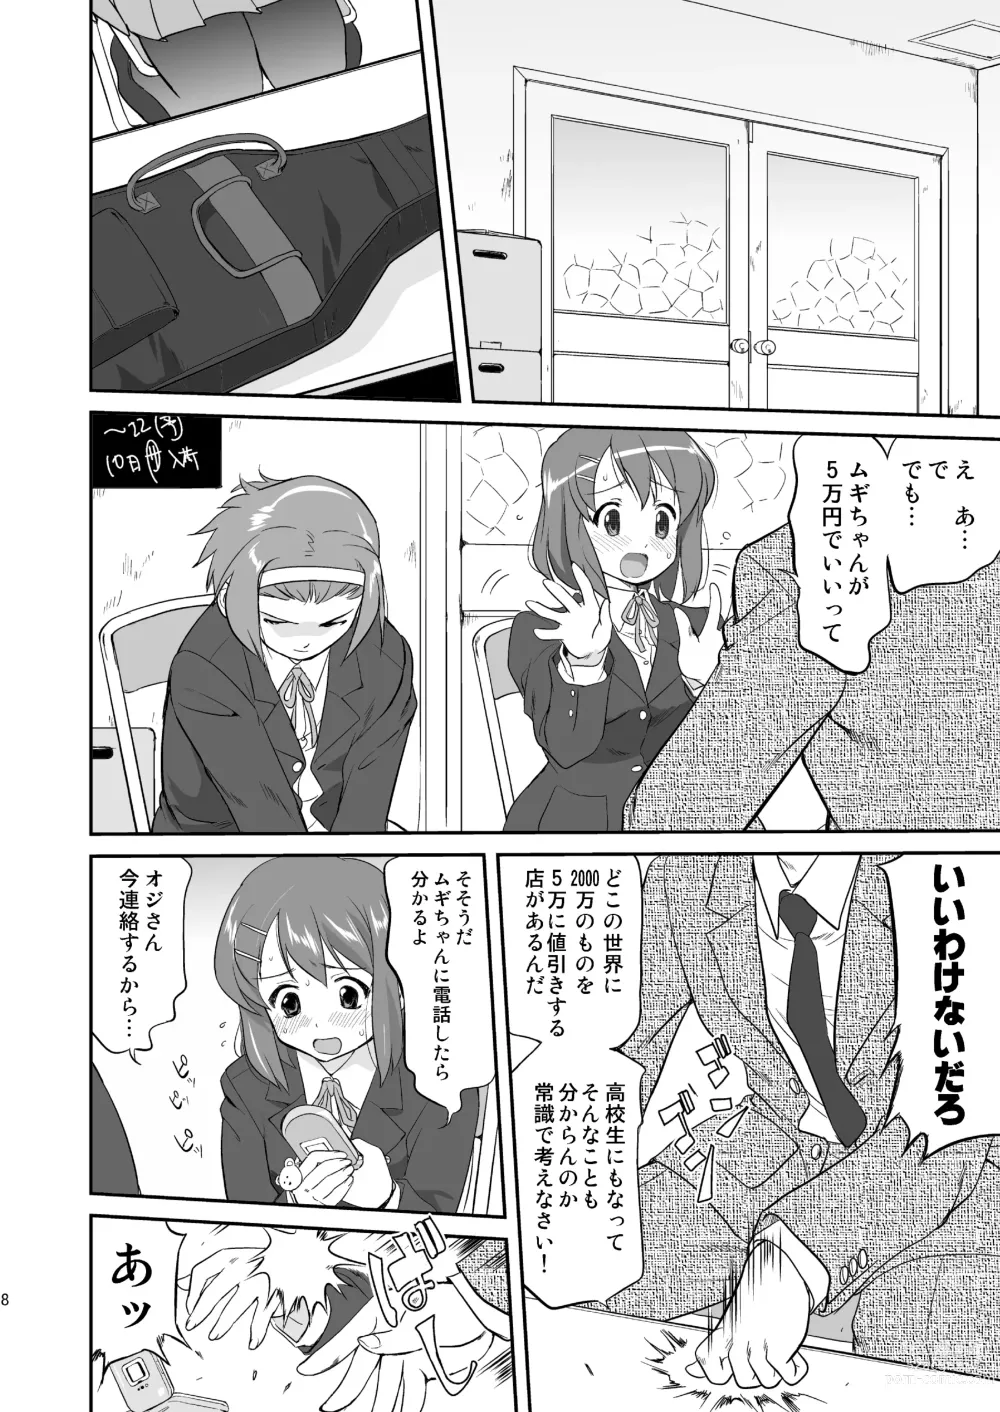 Page 8 of doujinshi K-ON Trilogy